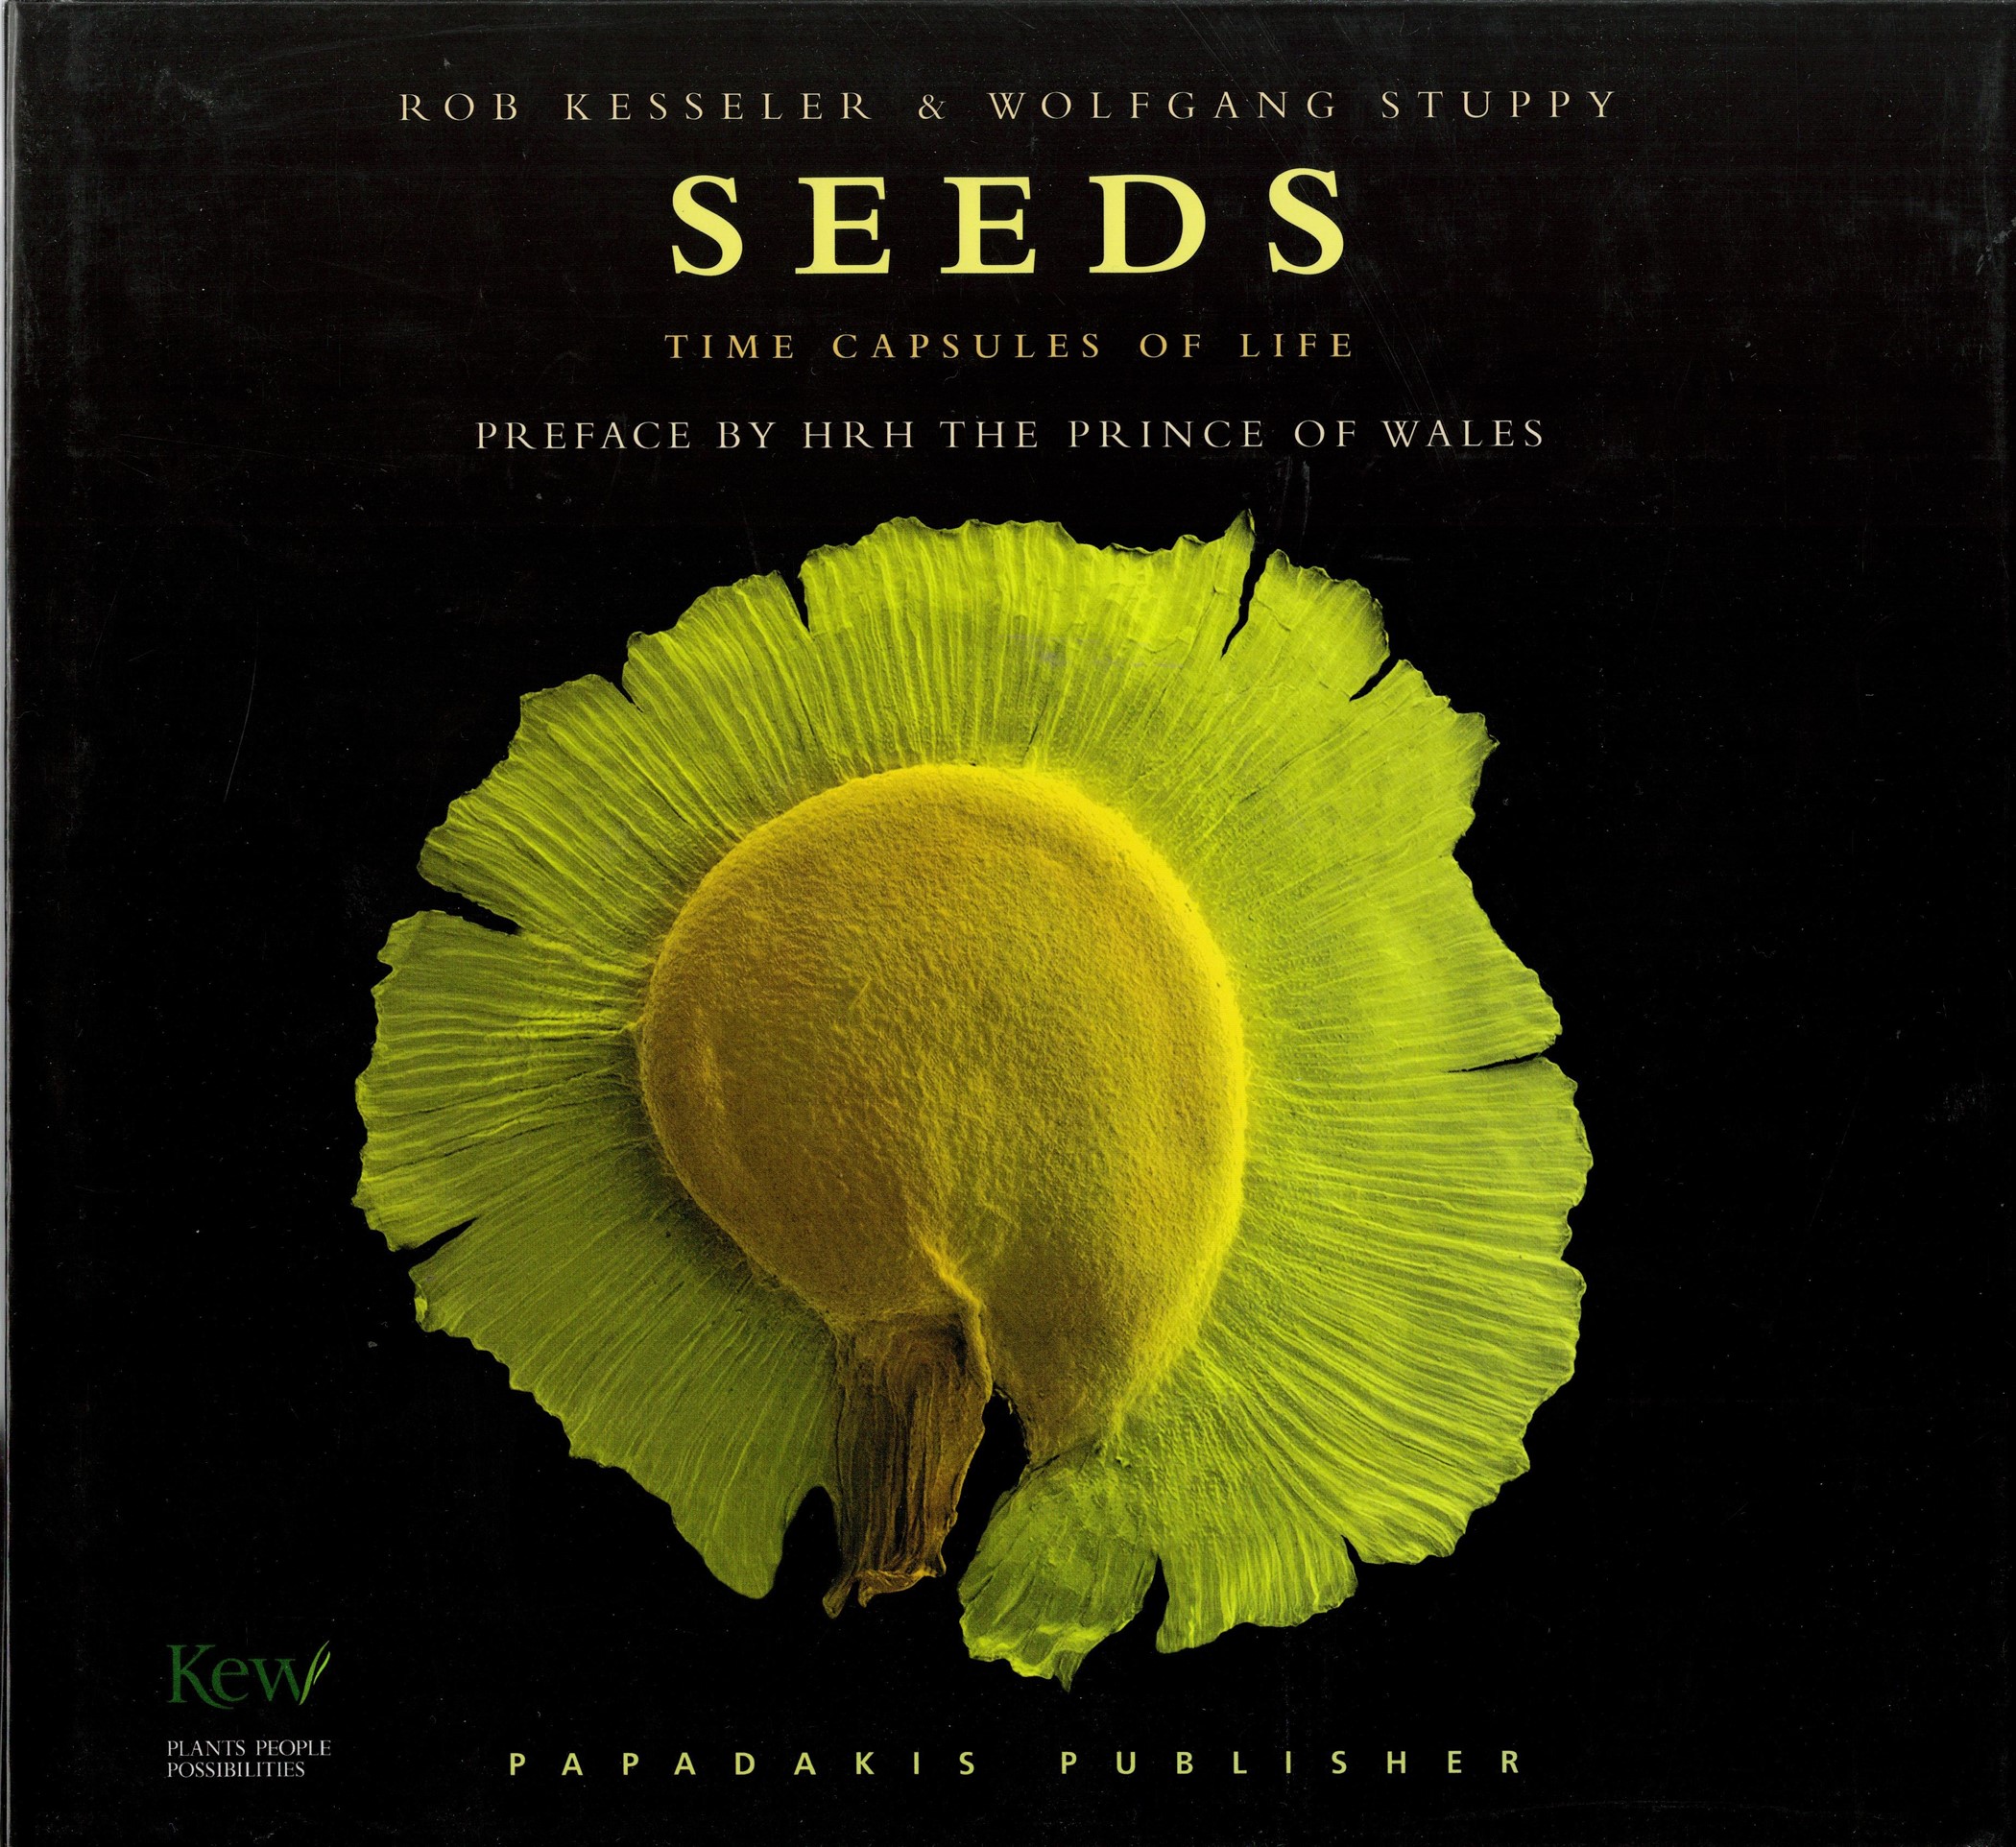 Seeds Time Capsules of Life by R Kesseler and W Stuppy Hardback Book 2006 First Edition published by